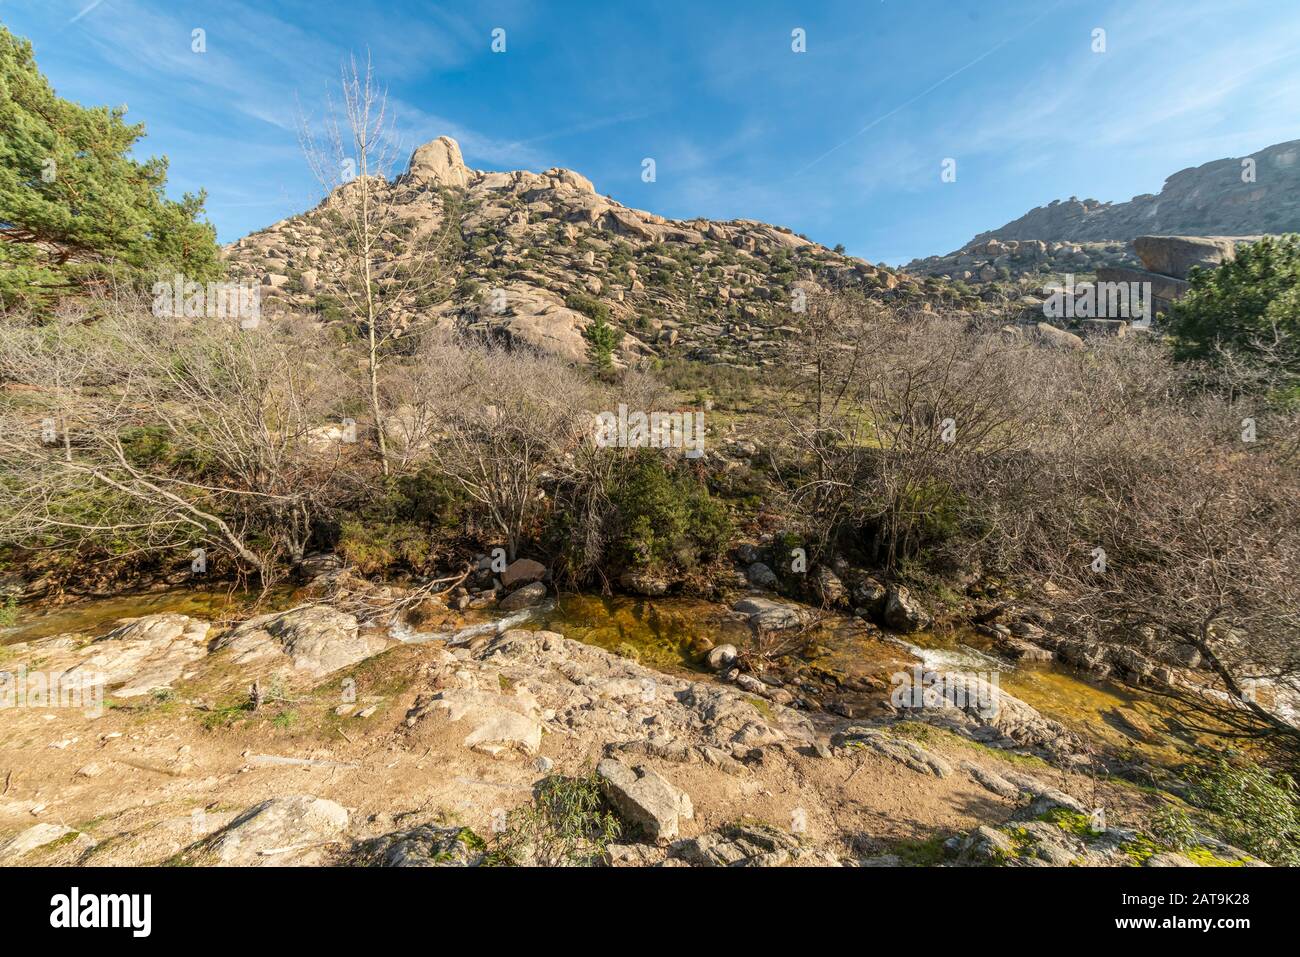 Amazing forest view with the trees, Manzanares river and in far distance the rugged granite mountains of La Pedriza area inside Sierra de Guadarrama Stock Photo